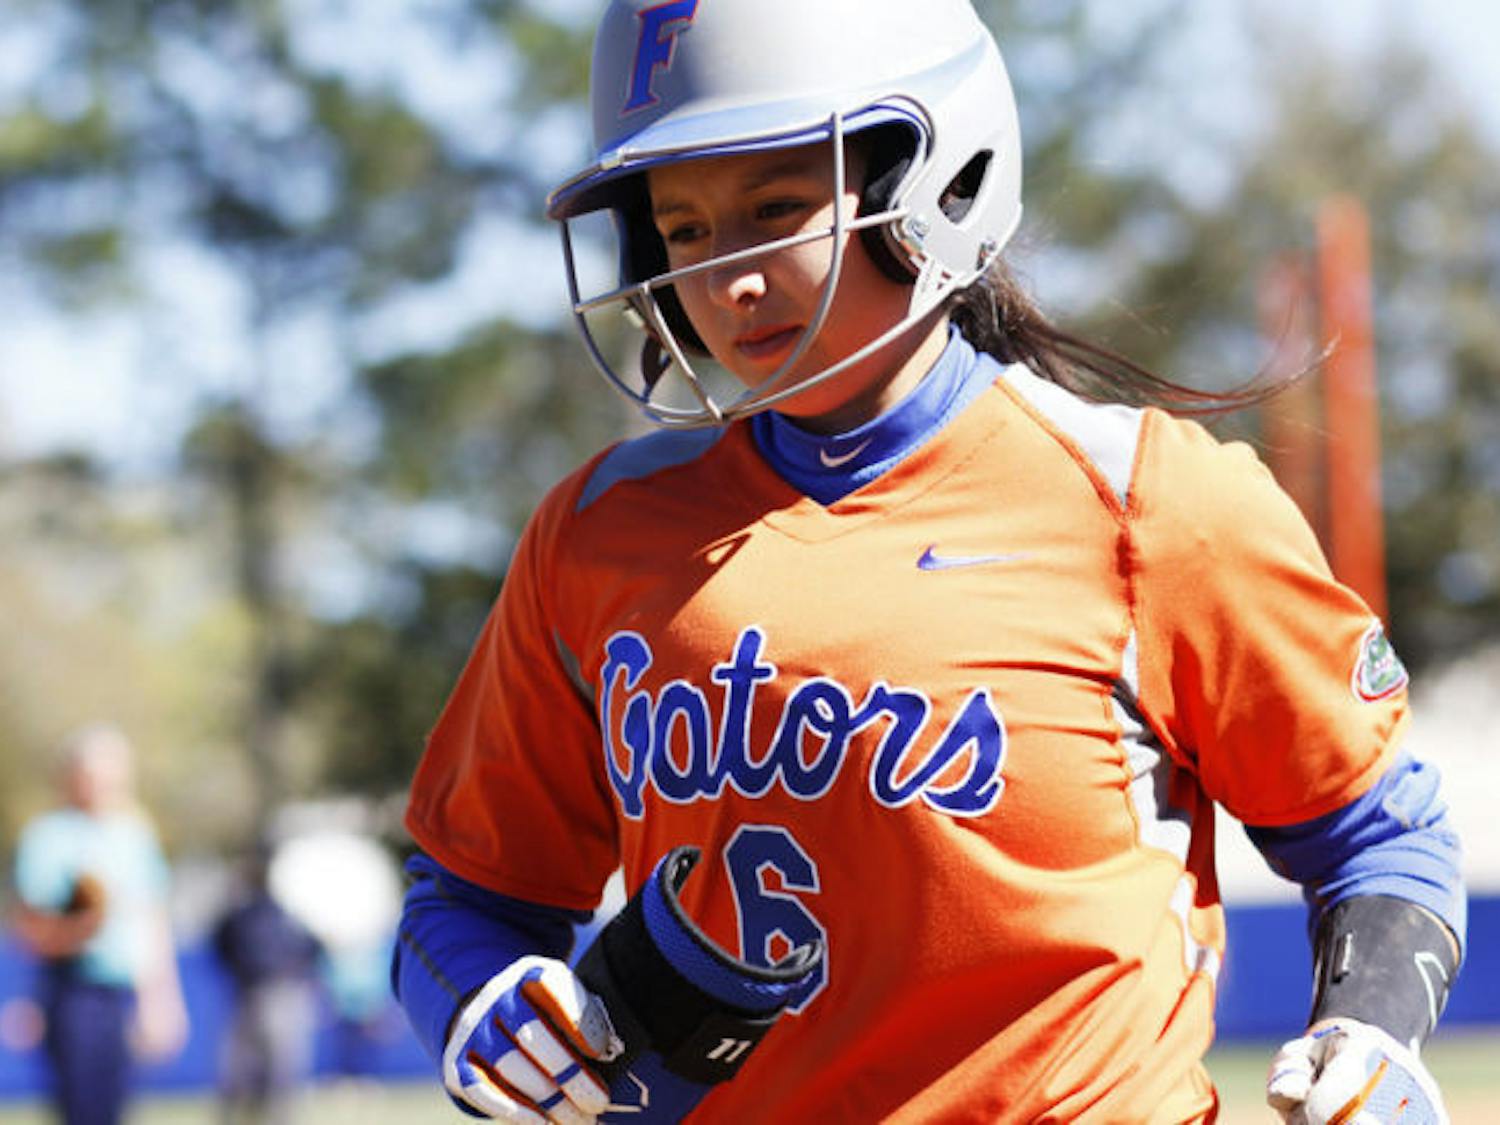 Katie Medina jogs out of the batter’s box during Florida’s 9-1 win over UNC Wilmington on Feb. 17 at Katie Seashole Pressly Stadium. Medina singled with bases loaded to help Florida to a 4-3 walk-off victory against UAB on Saturday in the NCAA Super Regional.